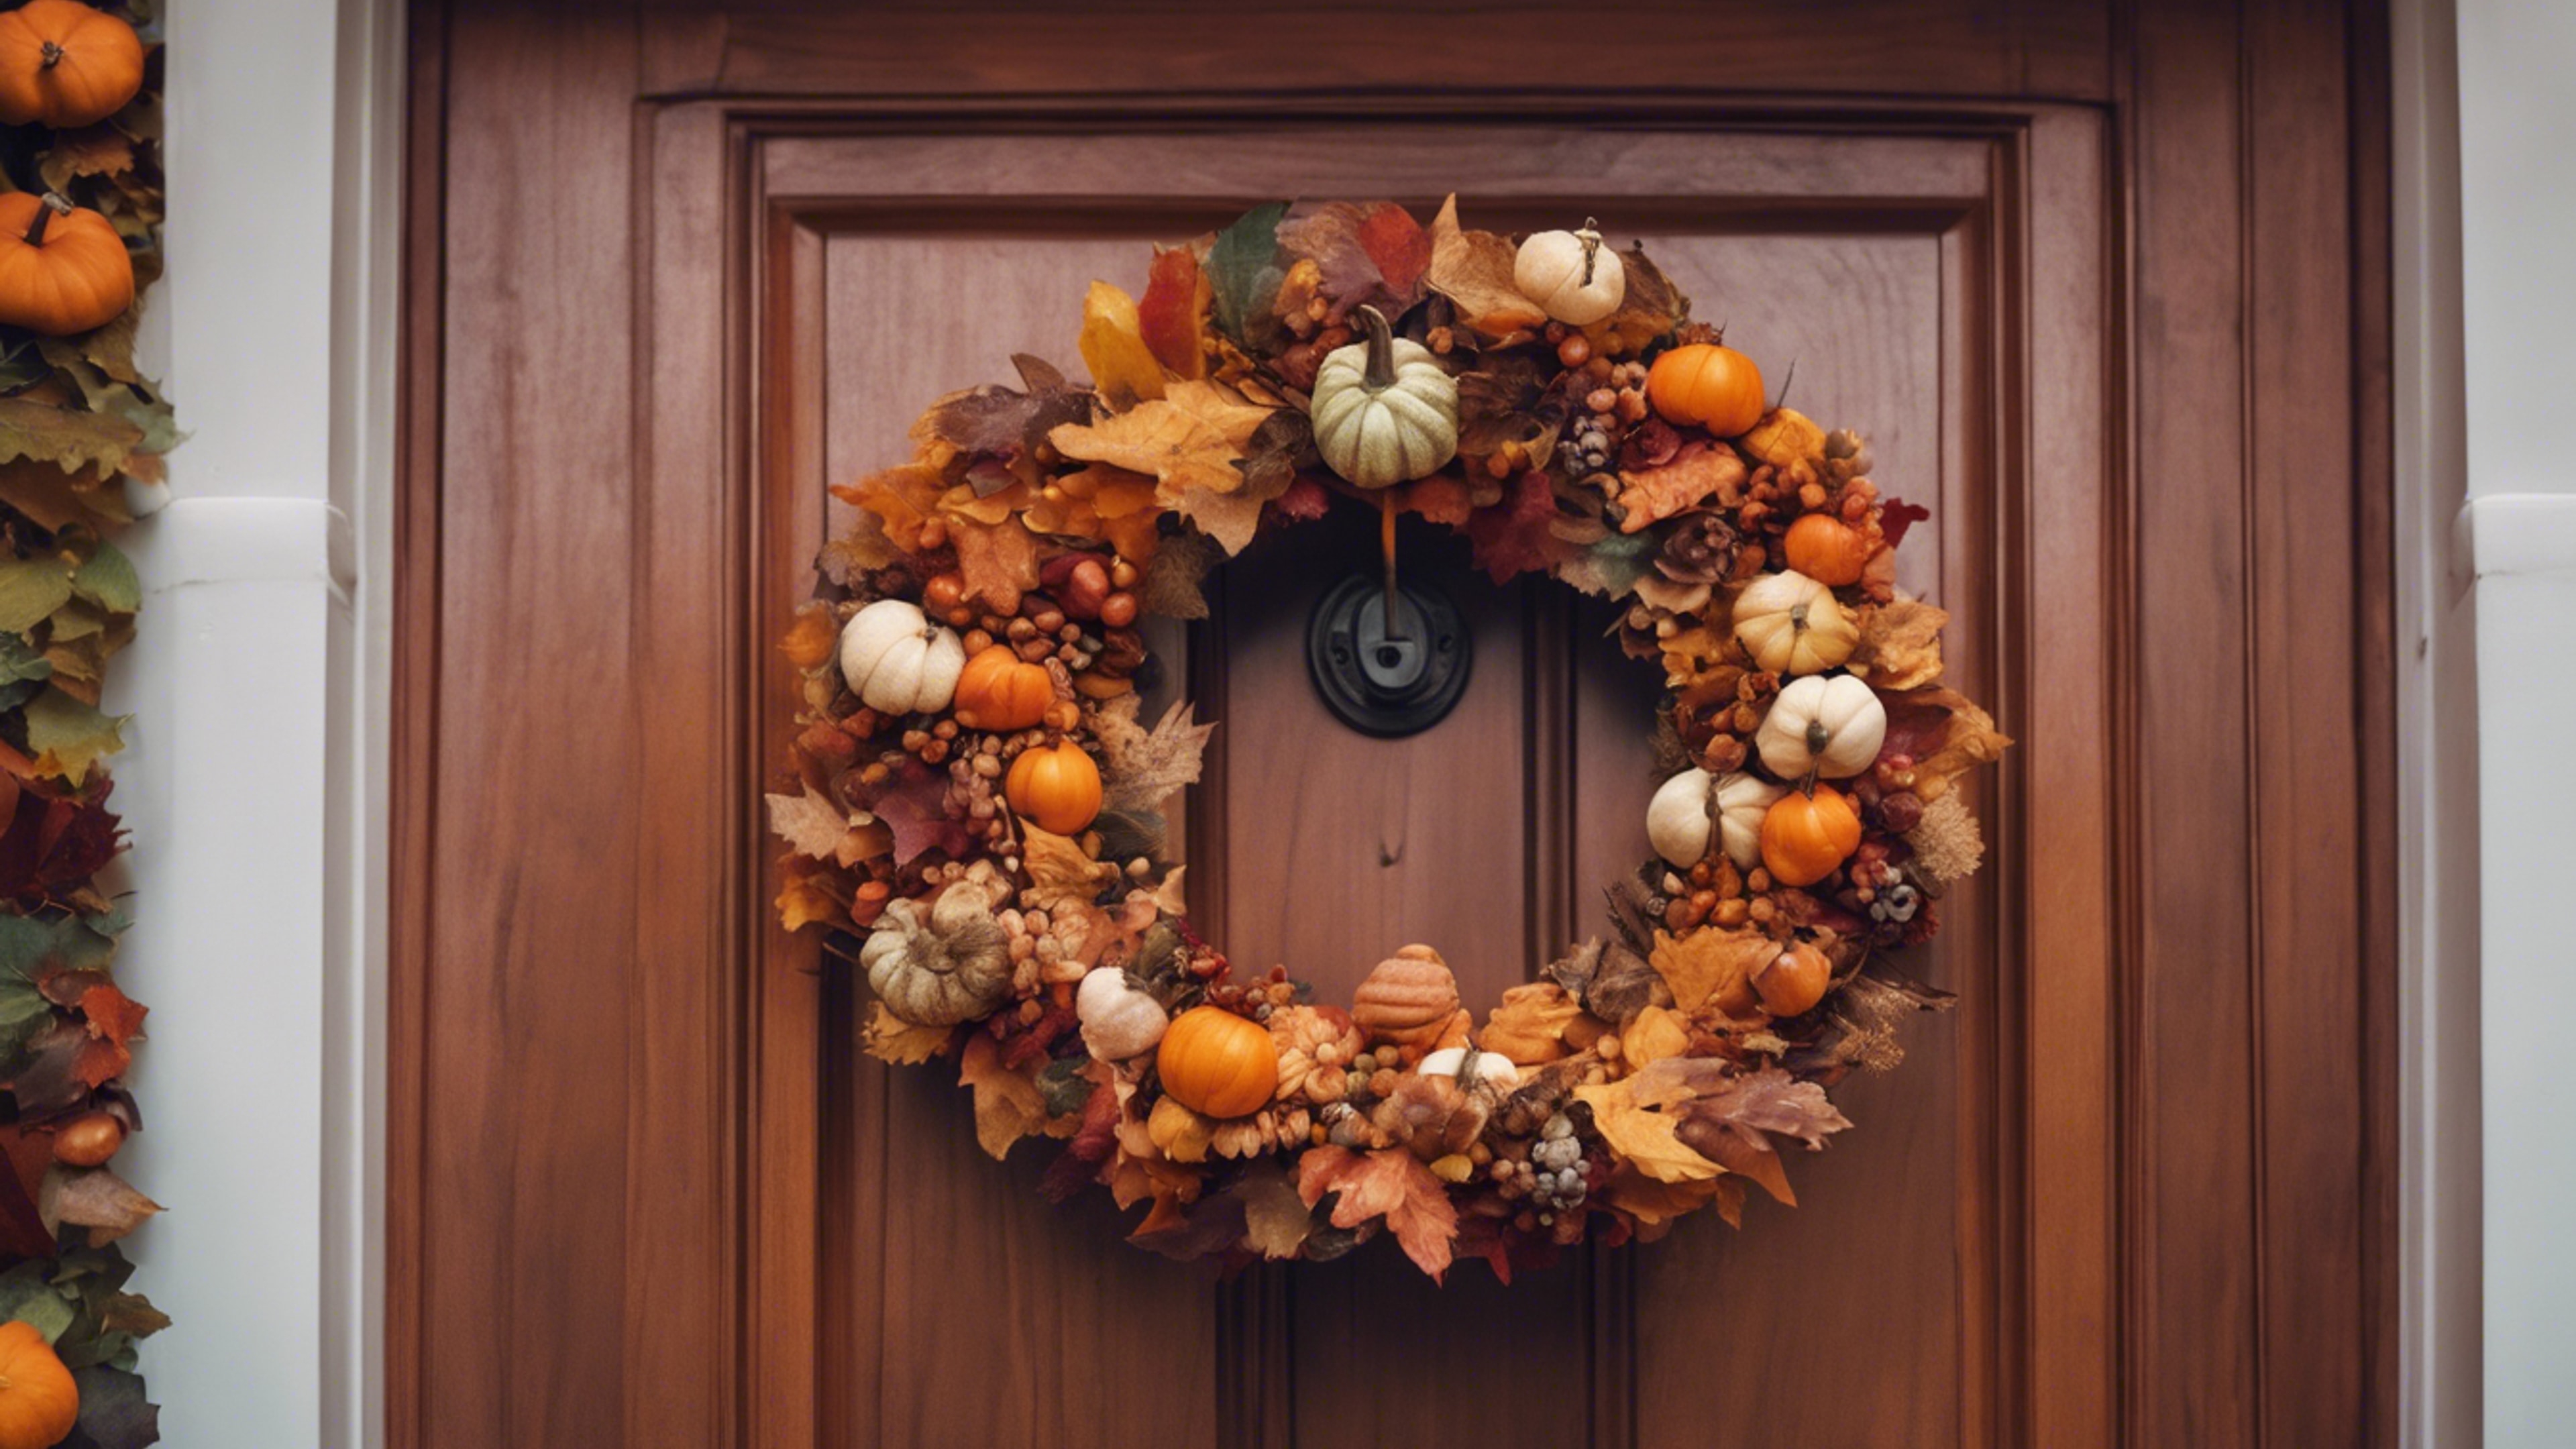 A festive autumn wreath made of colorful fall leaves and miniature pumpkins hanging elegantly on a mahogany door, signaling the start of the Thanksgiving holiday. Hintergrund[f1a39b05ecd5476686a3]